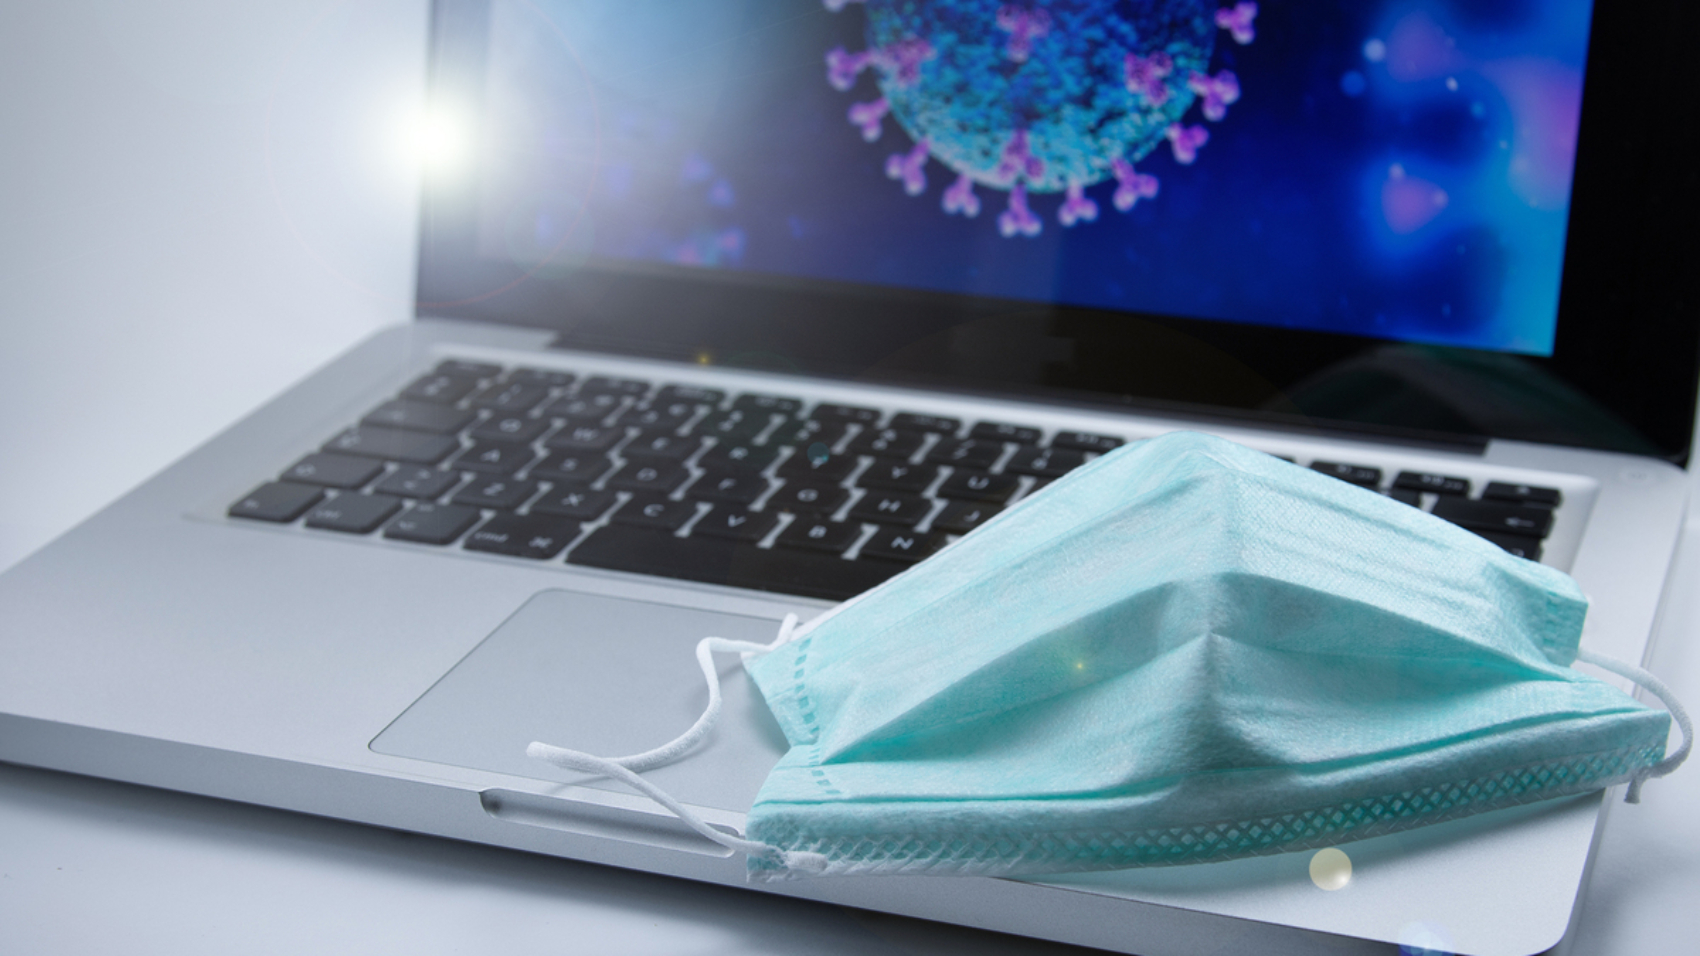 protective_face_mask_on_laptop_displaying_covid-19_coronavirus_cell_morphology_infection_outbreak_pandemic_by_rs74_gettyimages-1220667912_2400x1600-100854883-large